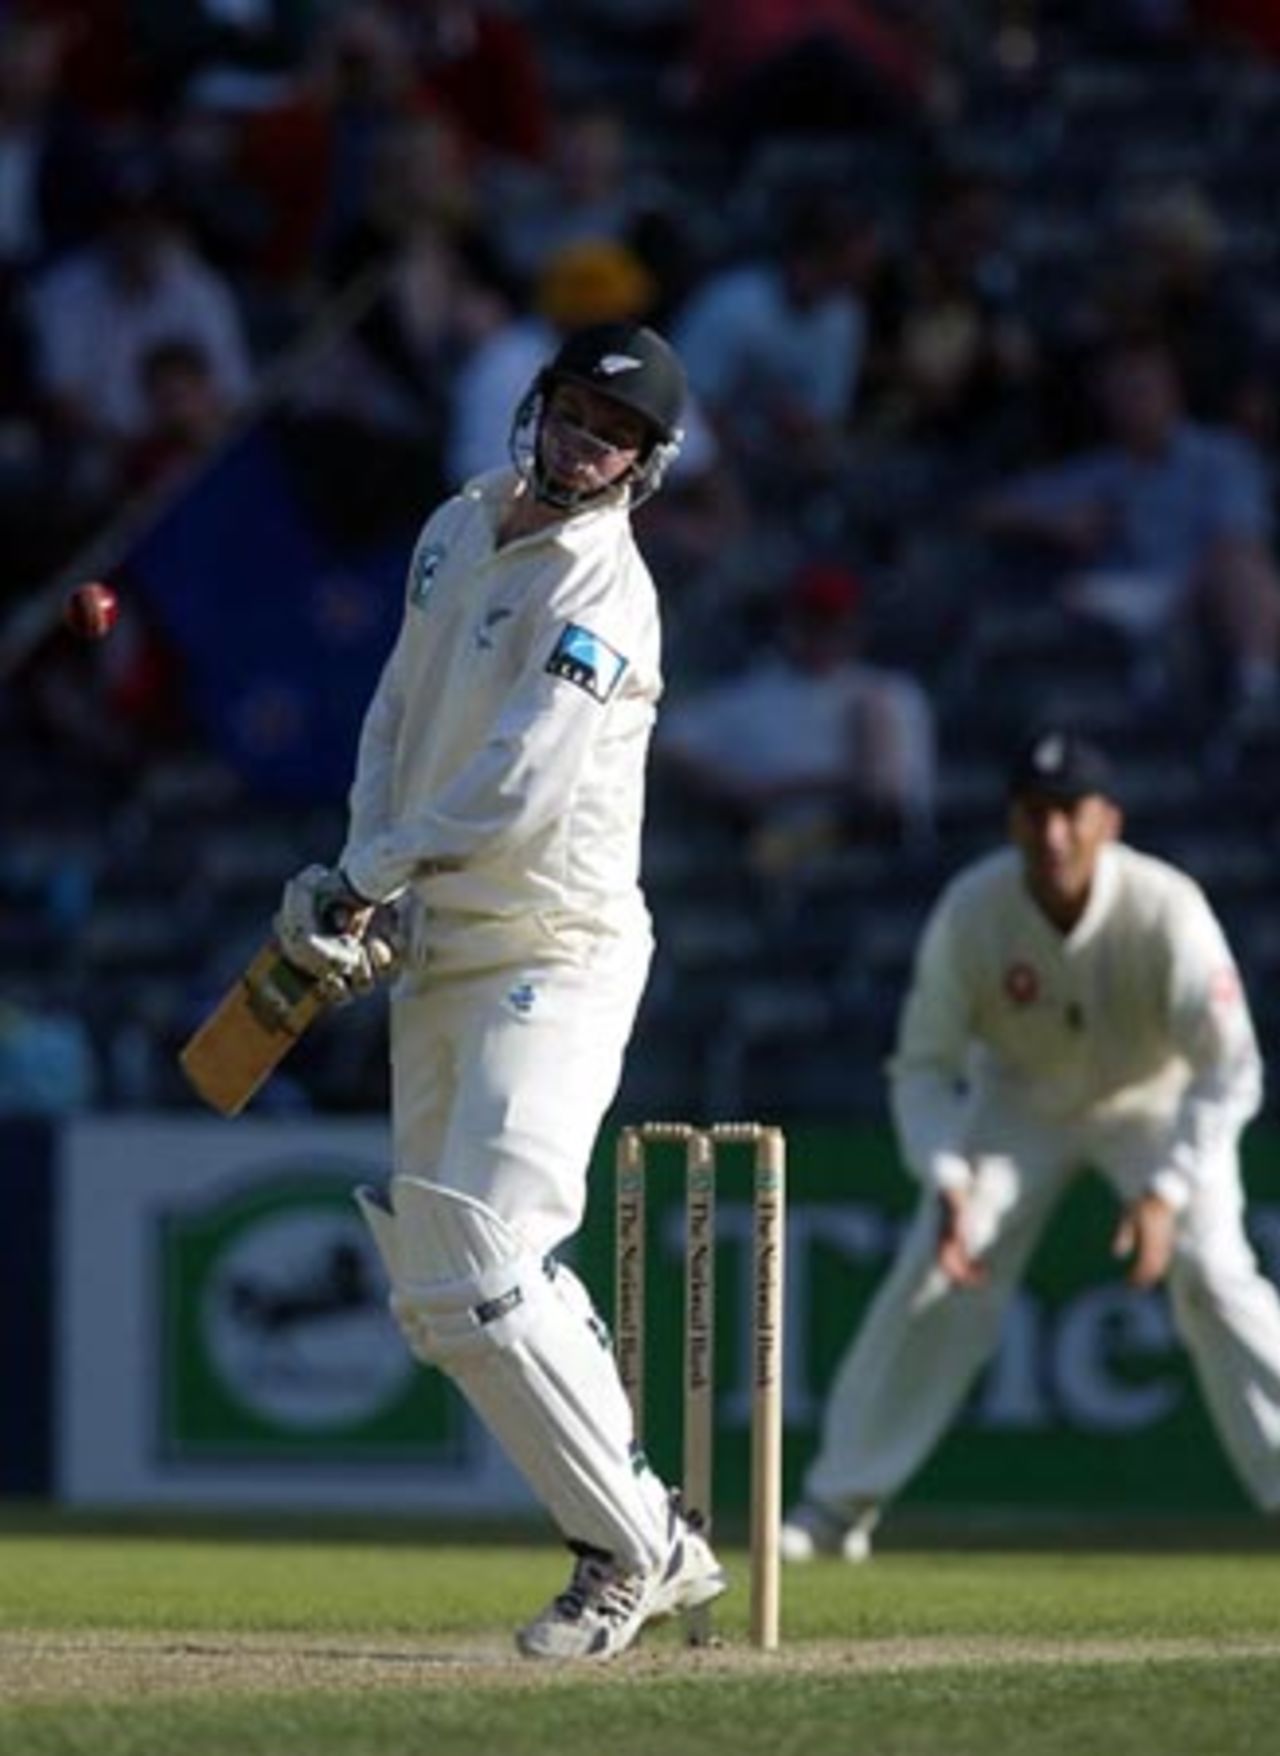 New Zealand batsman Matt Horne avoids a short delivery from England bowler Andy Caddick during his innings of three not out on the third day. 1st Test: New Zealand v England at Jade Stadium, Christchurch, 13-17 March 2002 (15 March 2002).